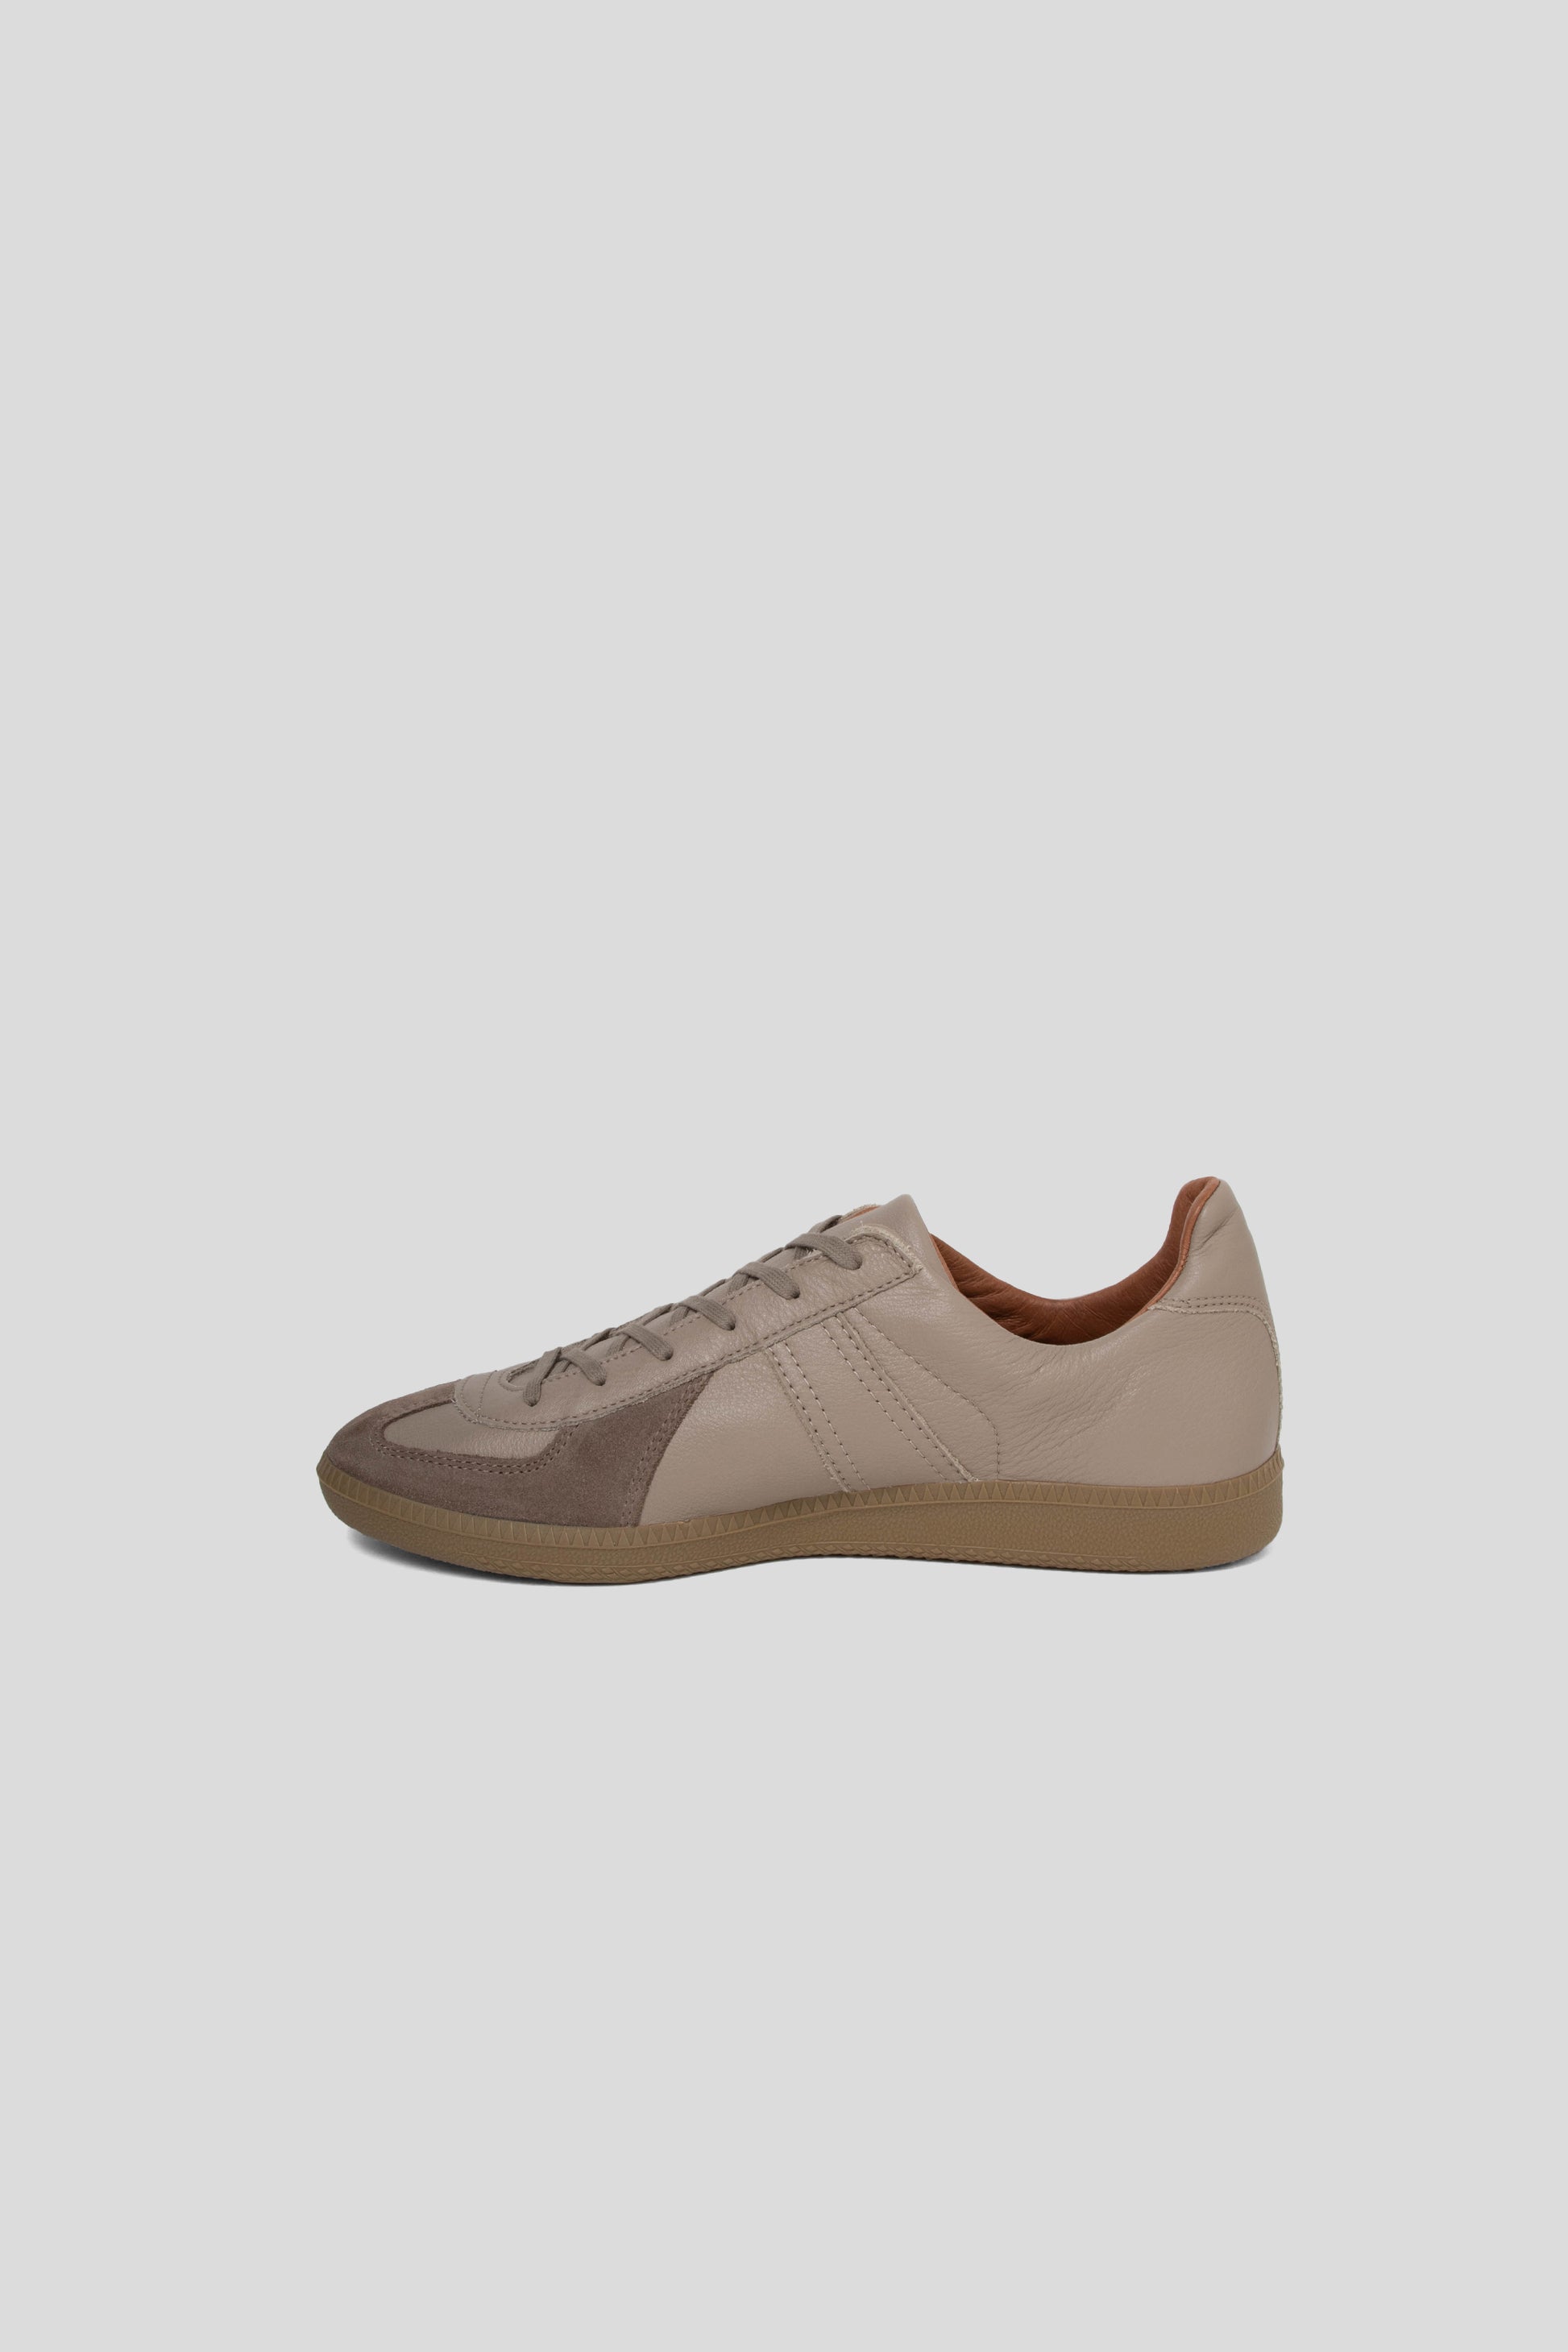 Reproduction of Found German Military Trainer - Beige Khaki